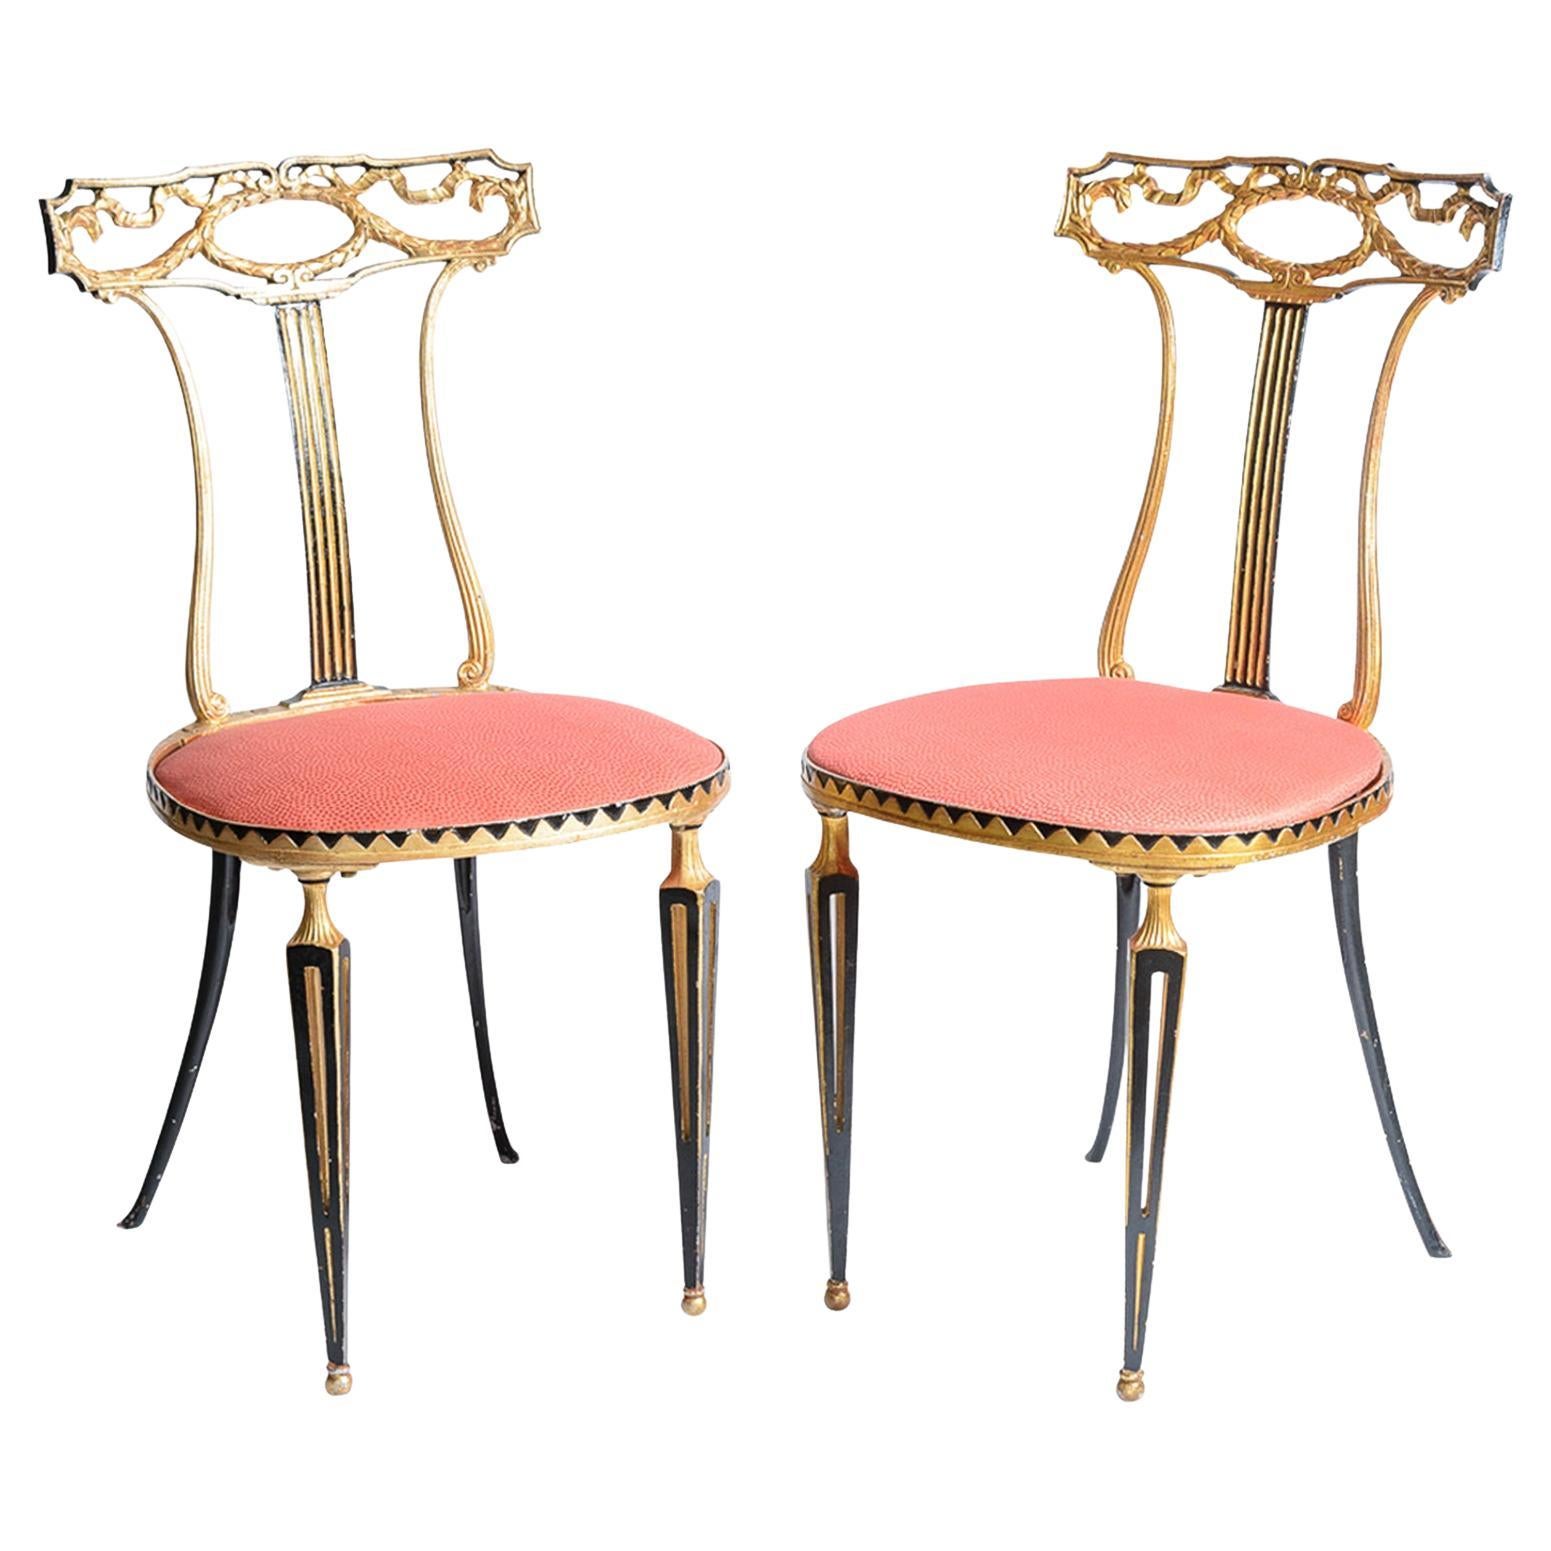 Italian Neoclassical Style Gilt Metal Chairs by Palladio, A-Pair